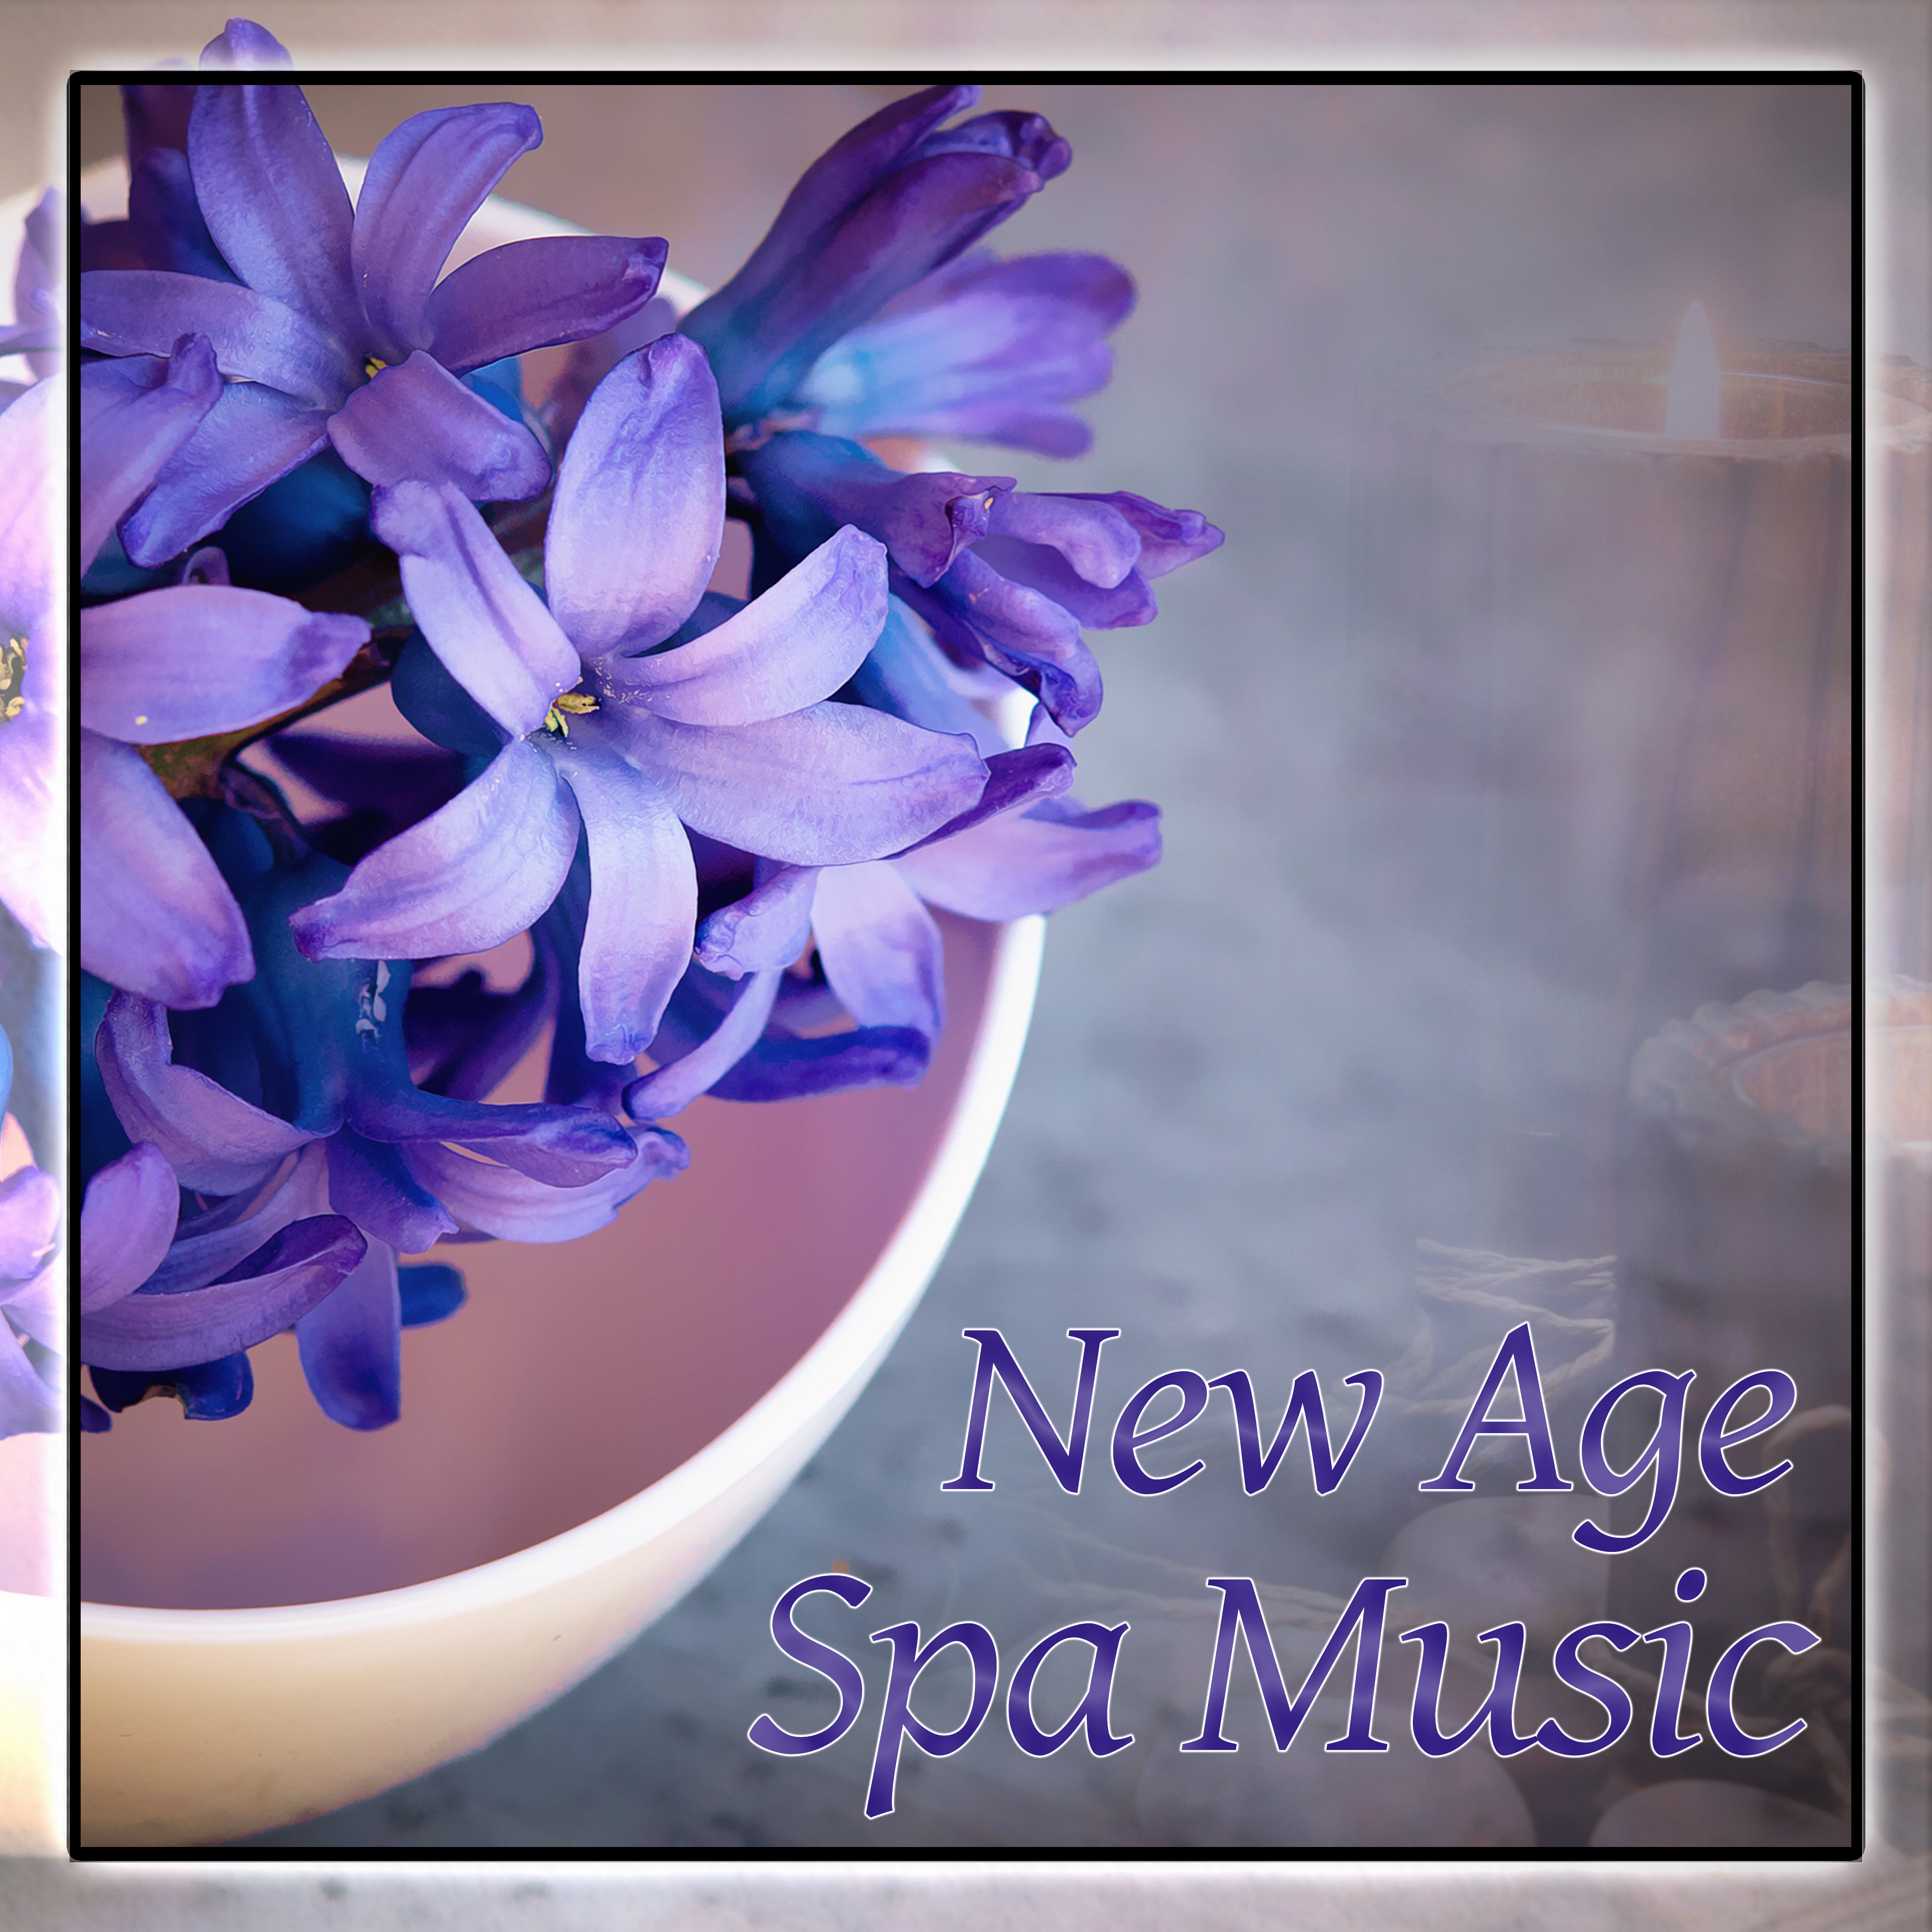 New Age Spa Music – Sensual Music for Home Spa, Deep Relaxing with Calming Sounds, Best to Massage Meditation, Nature Spa Music to Relieve Stress, Beautiful Moments